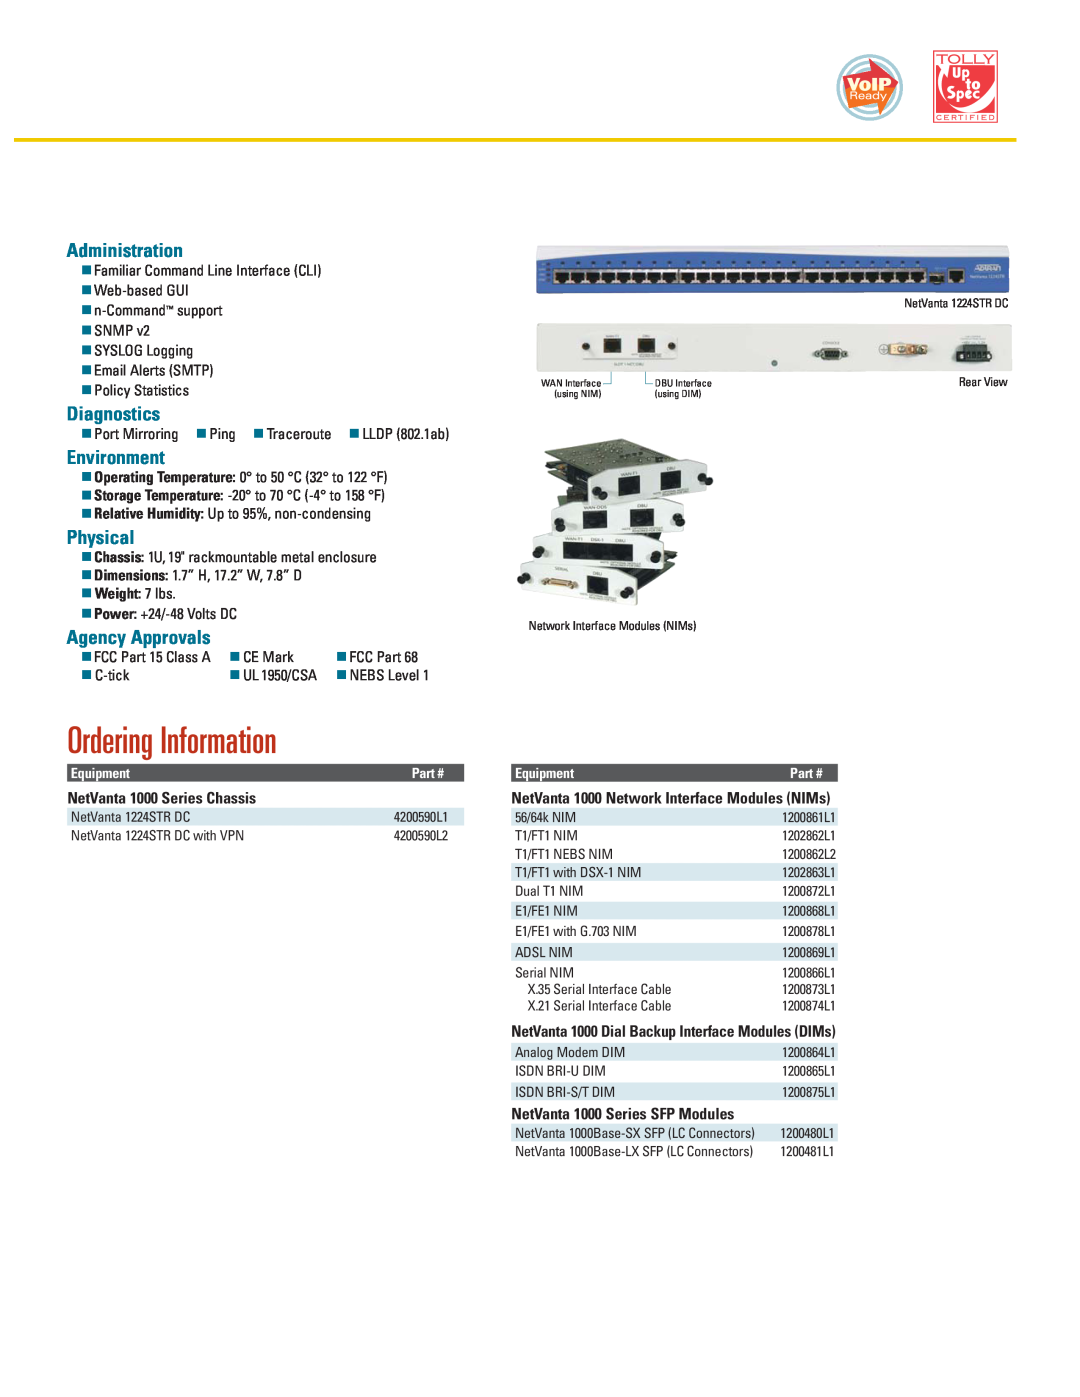 ADTRAN 1224STR DC Ordering Information, Administration, Diagnostics, Environment, Physical, Agency Approvals, Weight 7 lbs 